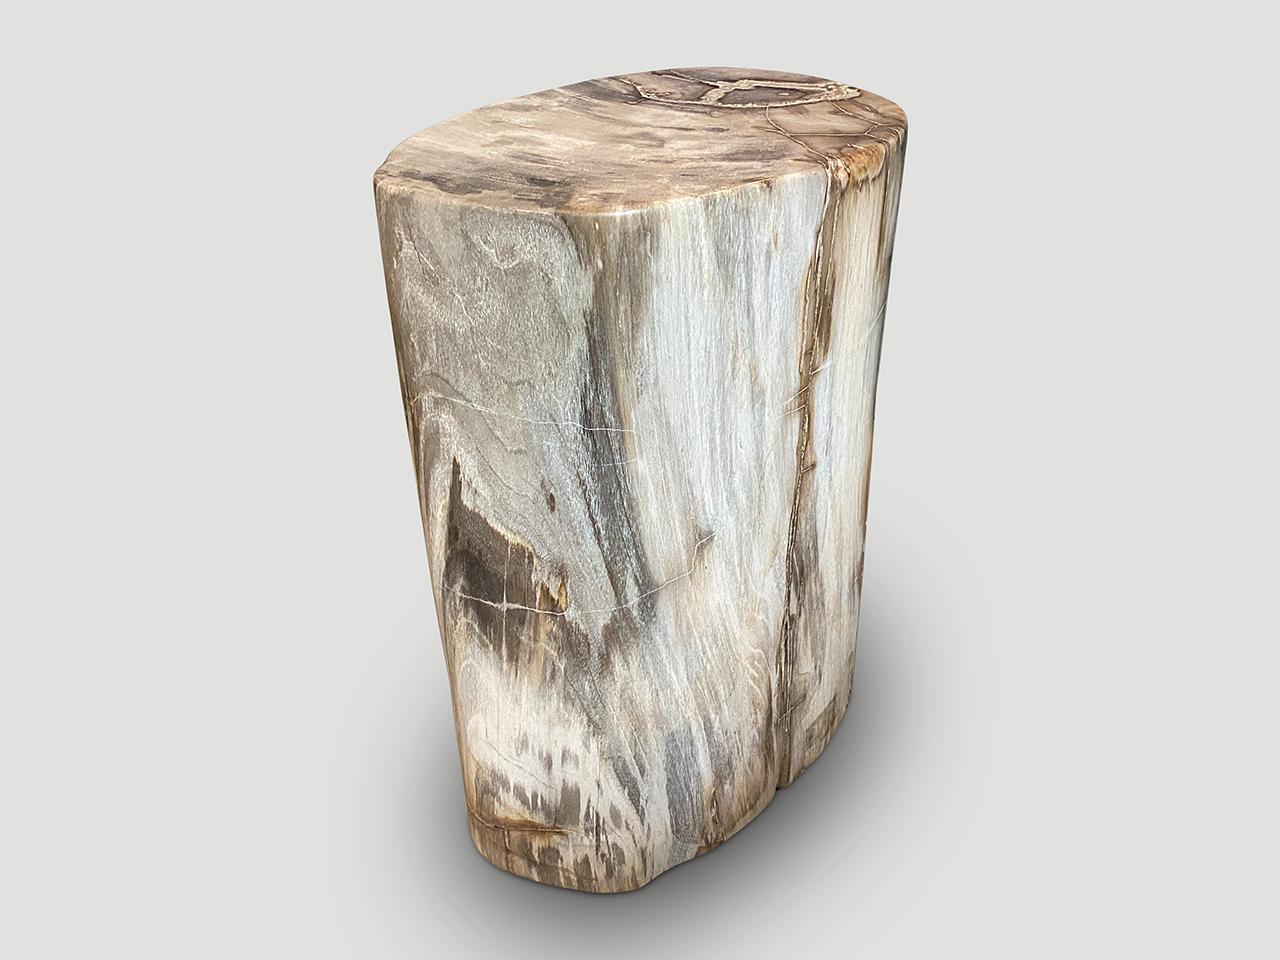 Andrianna Shamaris Exquisite High Quality Petrified Wood Side Table or Pedestal 4